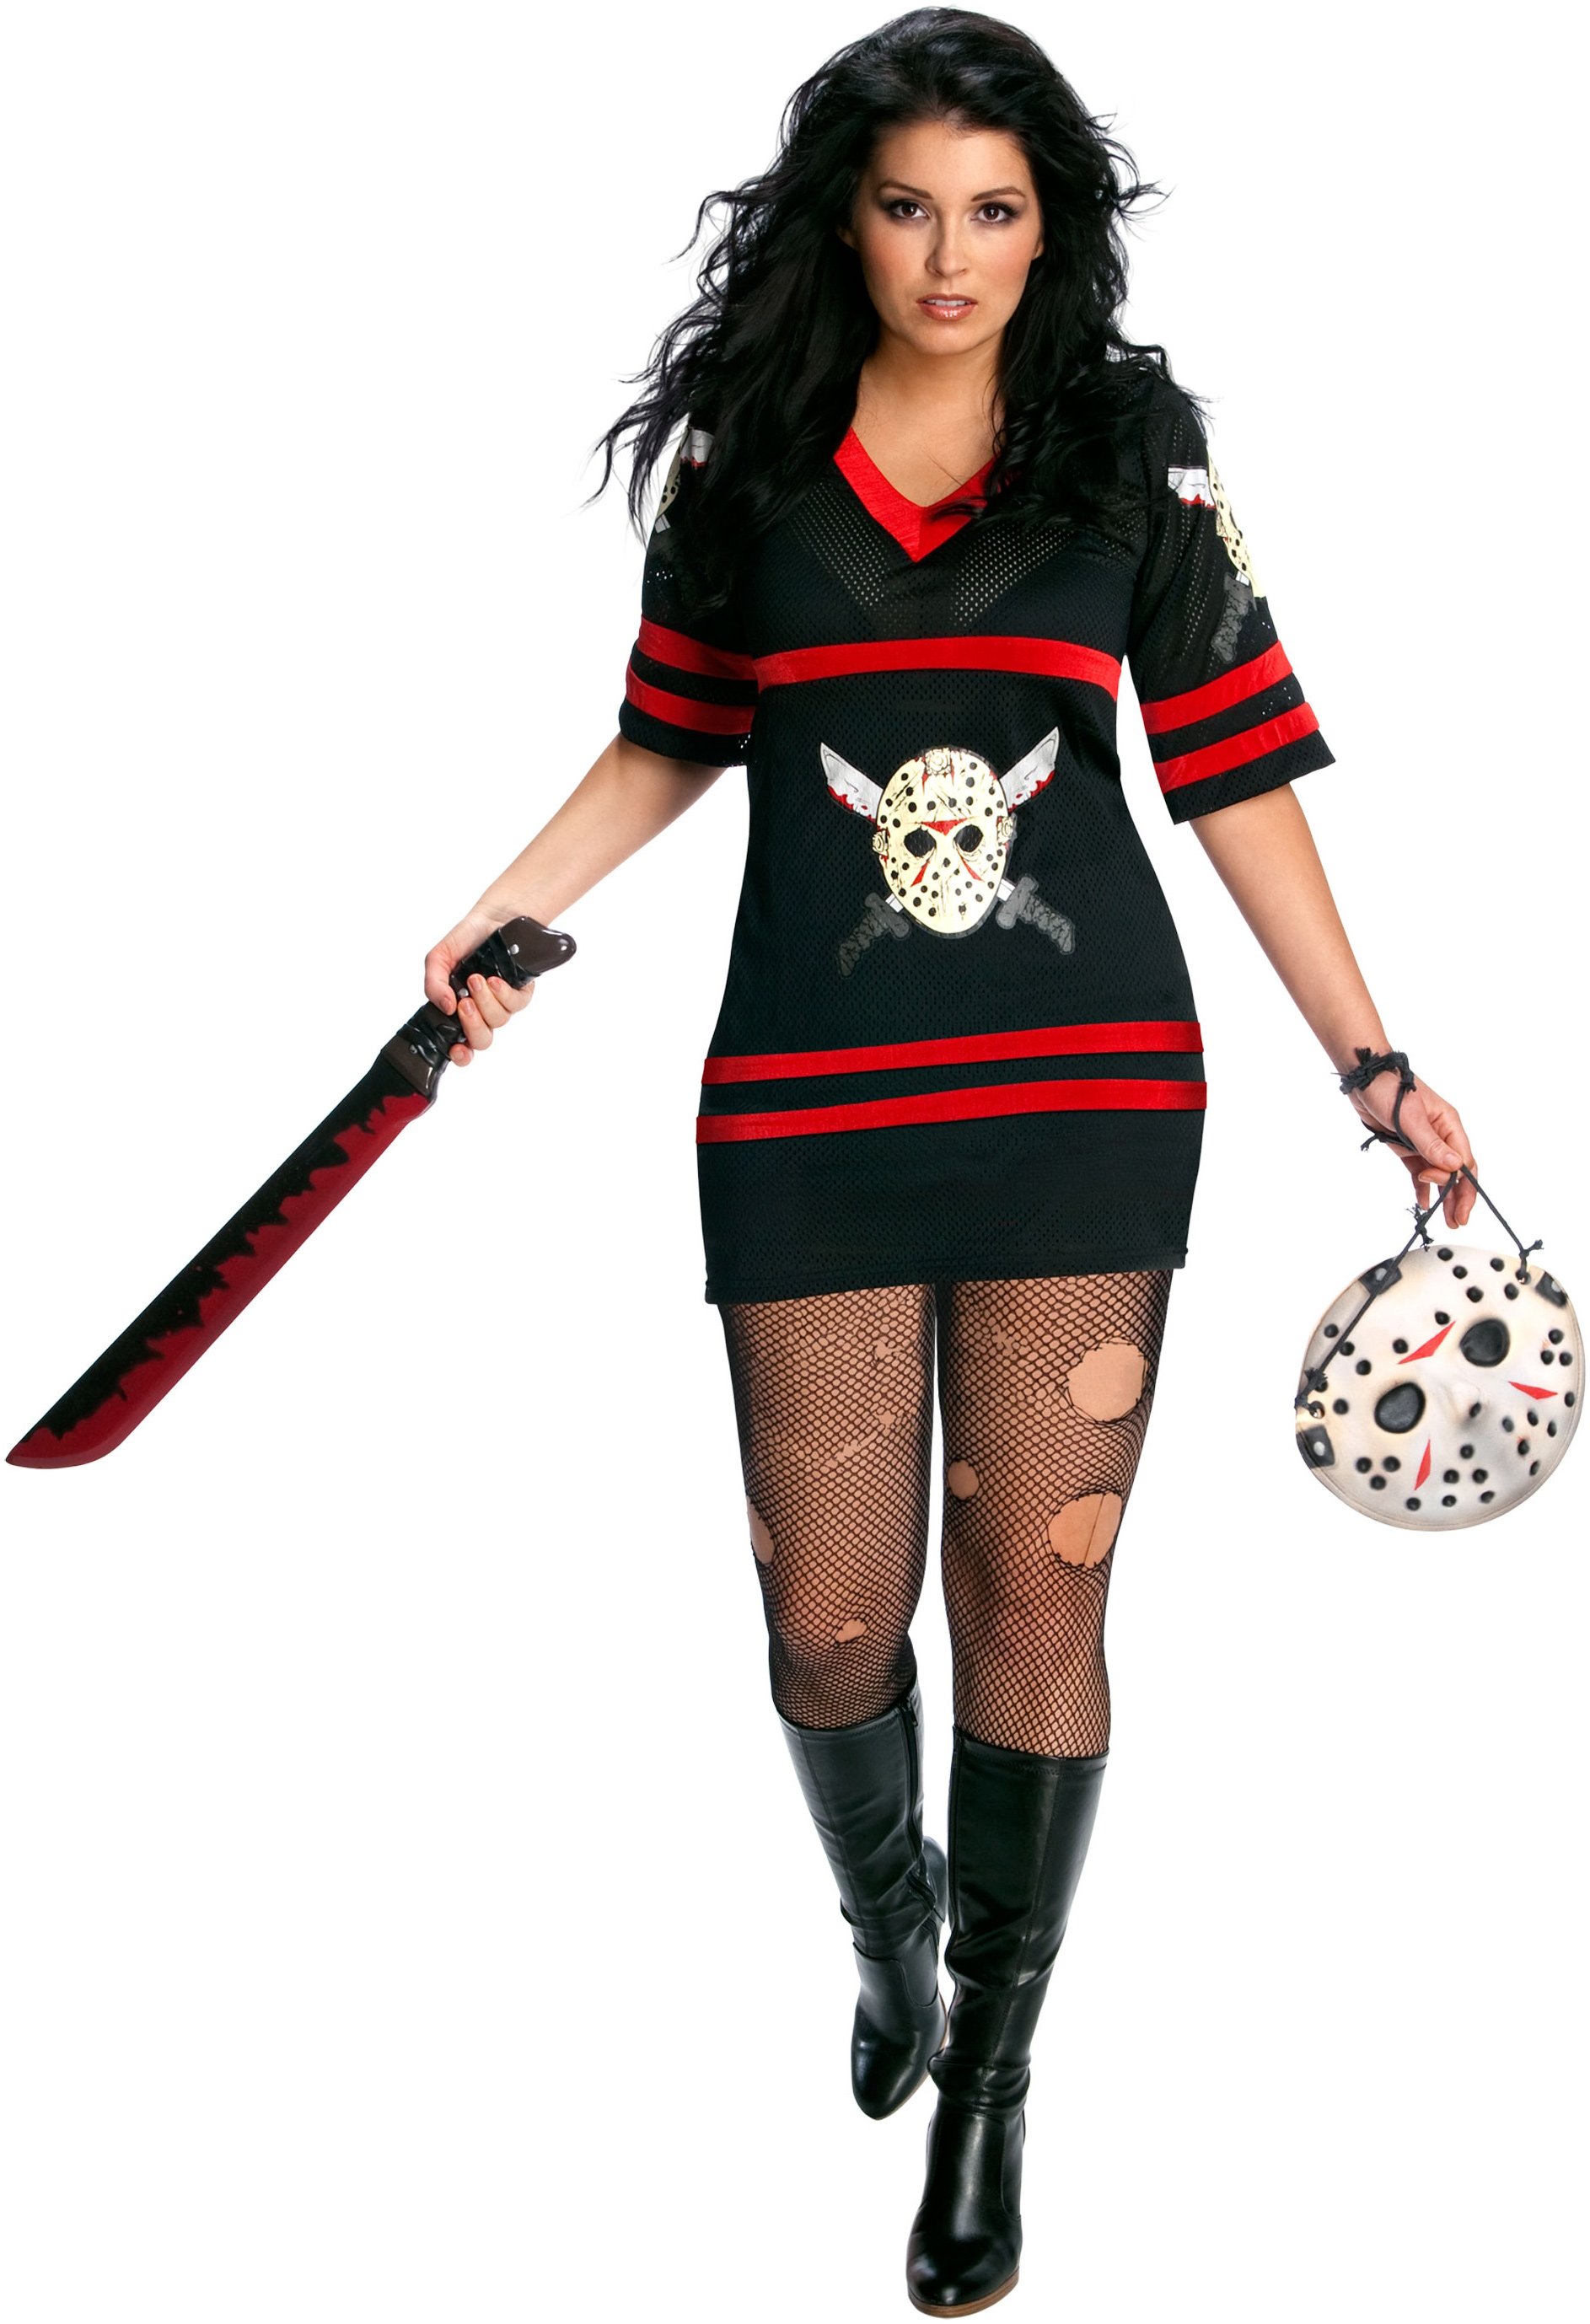 Friday The 13th - Sexy Miss Voorhees Plus Adult Costume